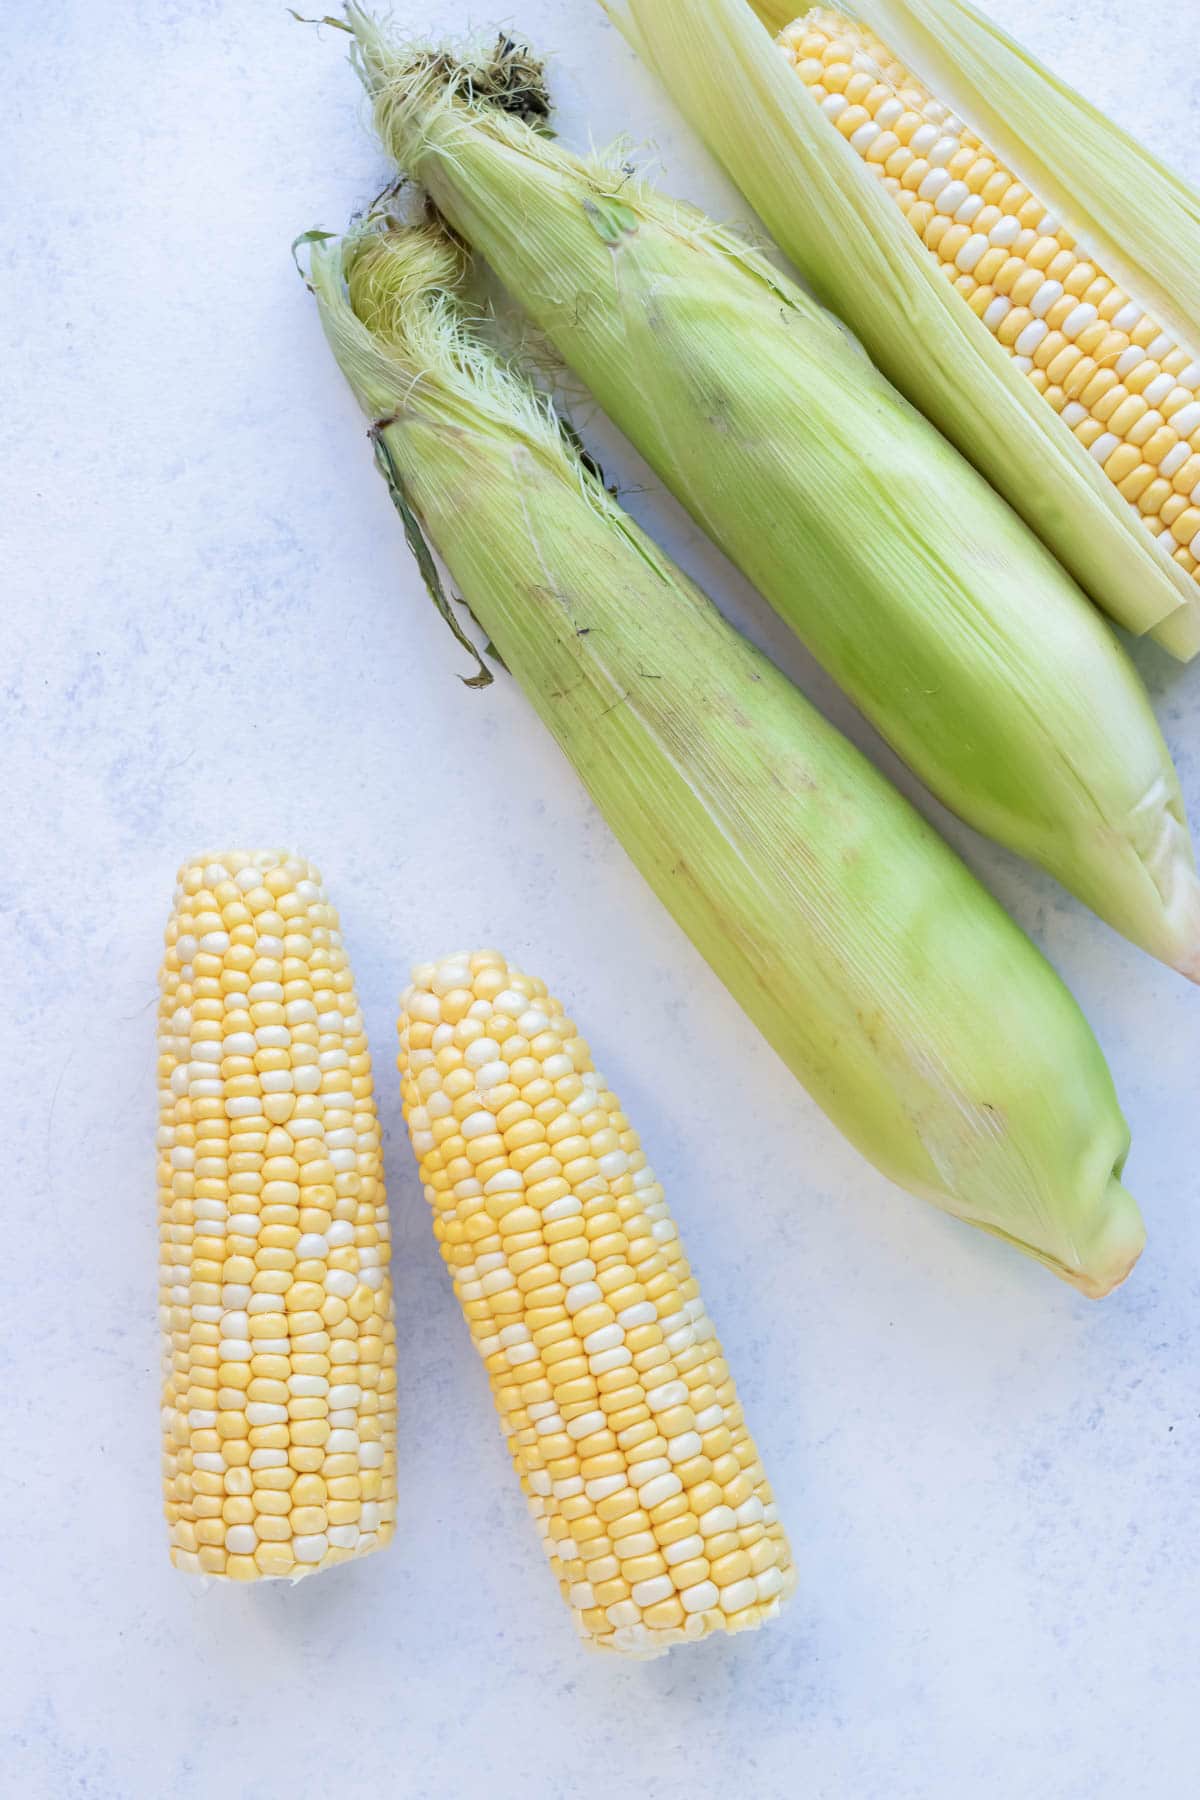 Corn with and without husks are shown on the counter.